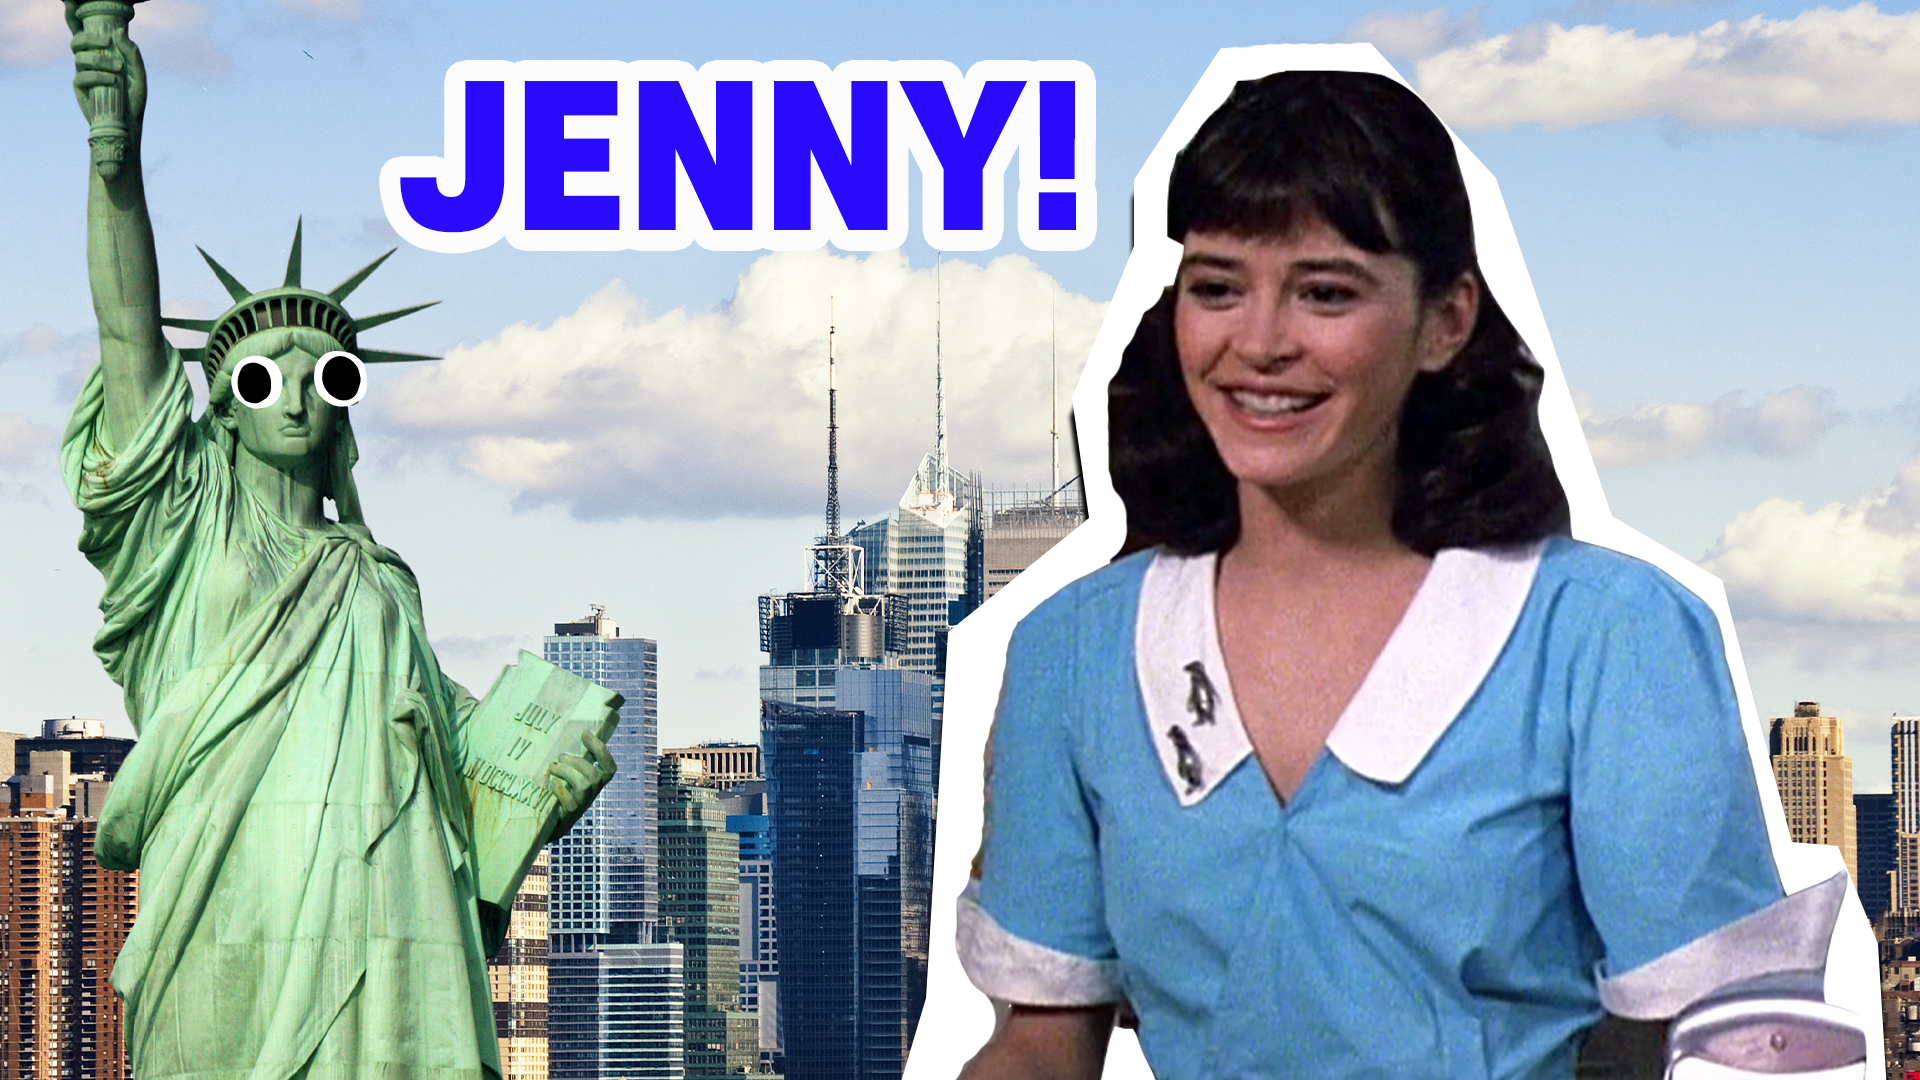 You're Jenny! Even when life seems kind of tough, nothing gets you down! You've got big dreams and you know one day you're gonna get there!